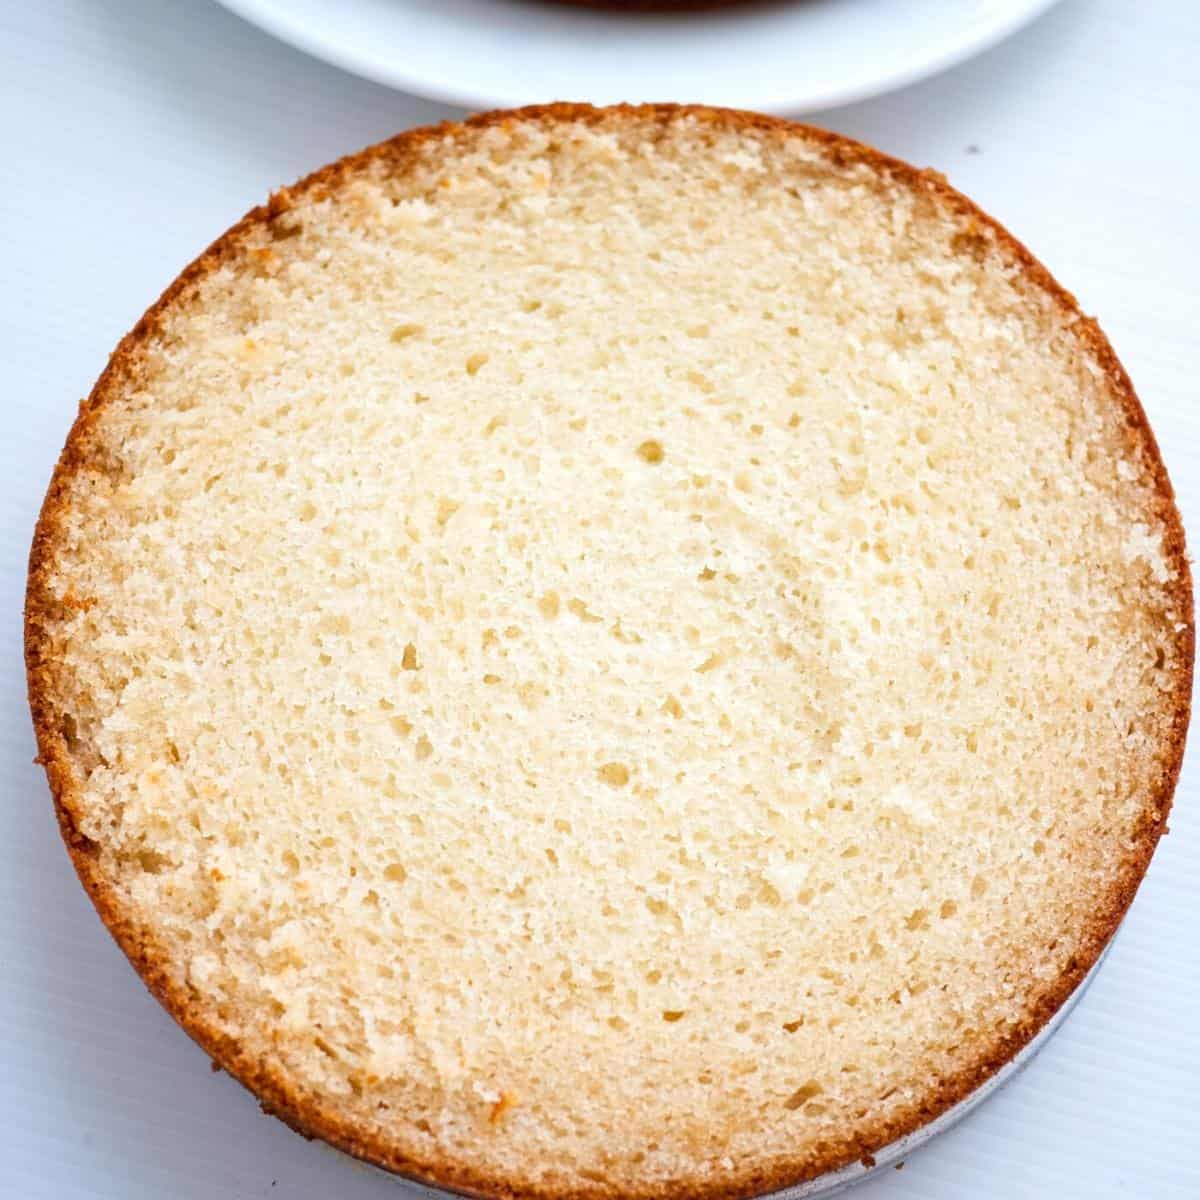 A torted vanilla cake showing the texture inside.